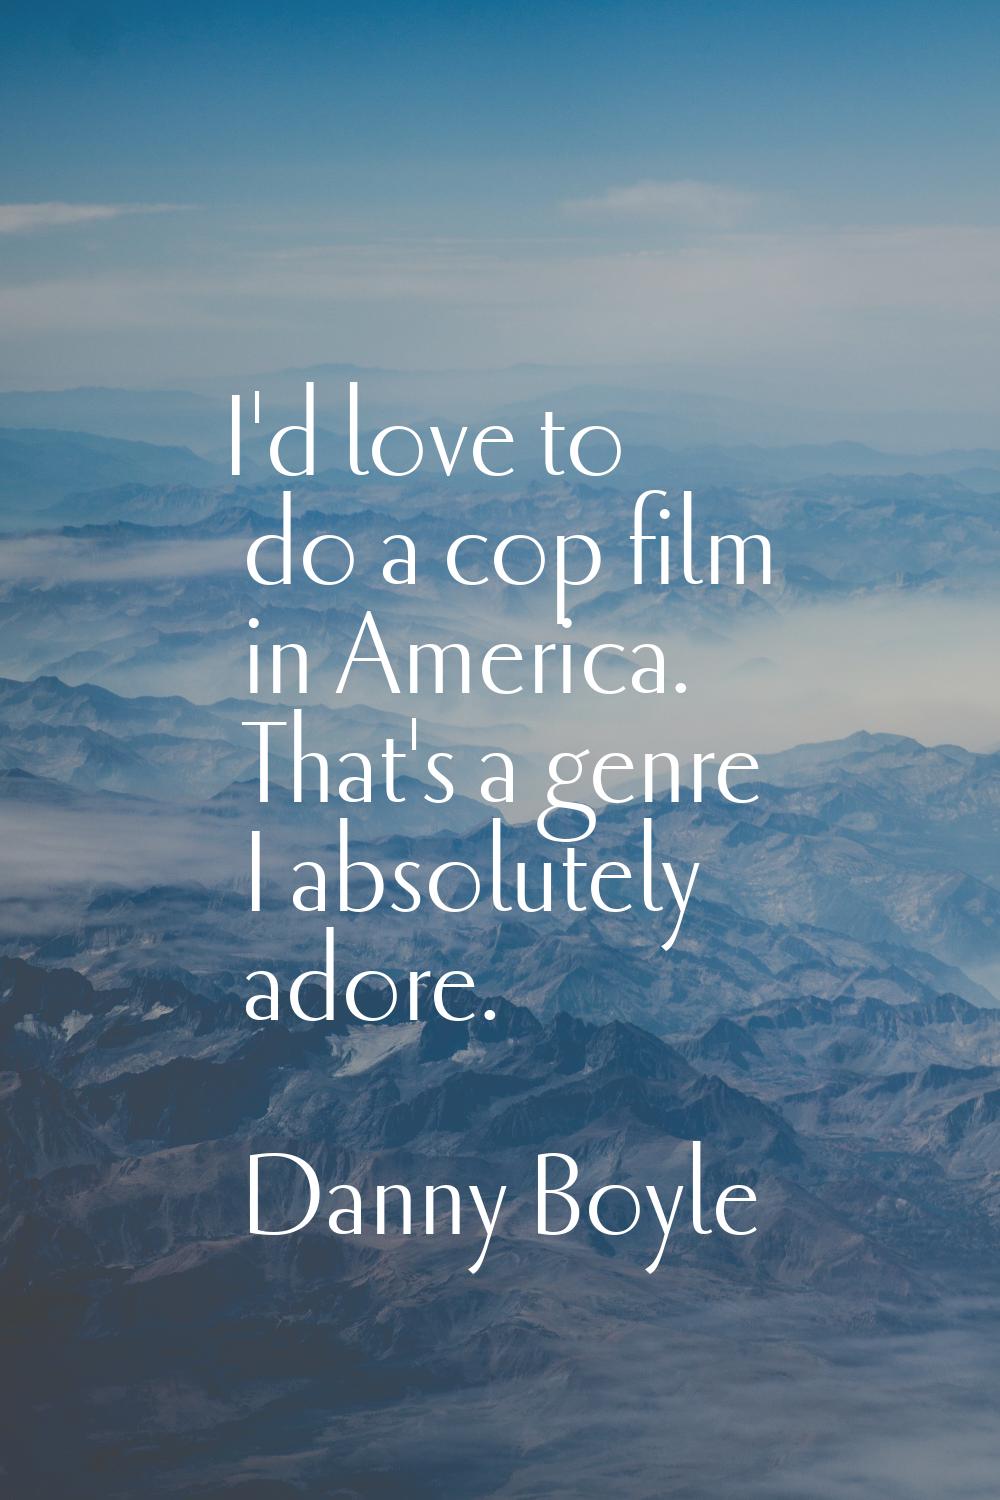 I'd love to do a cop film in America. That's a genre I absolutely adore.